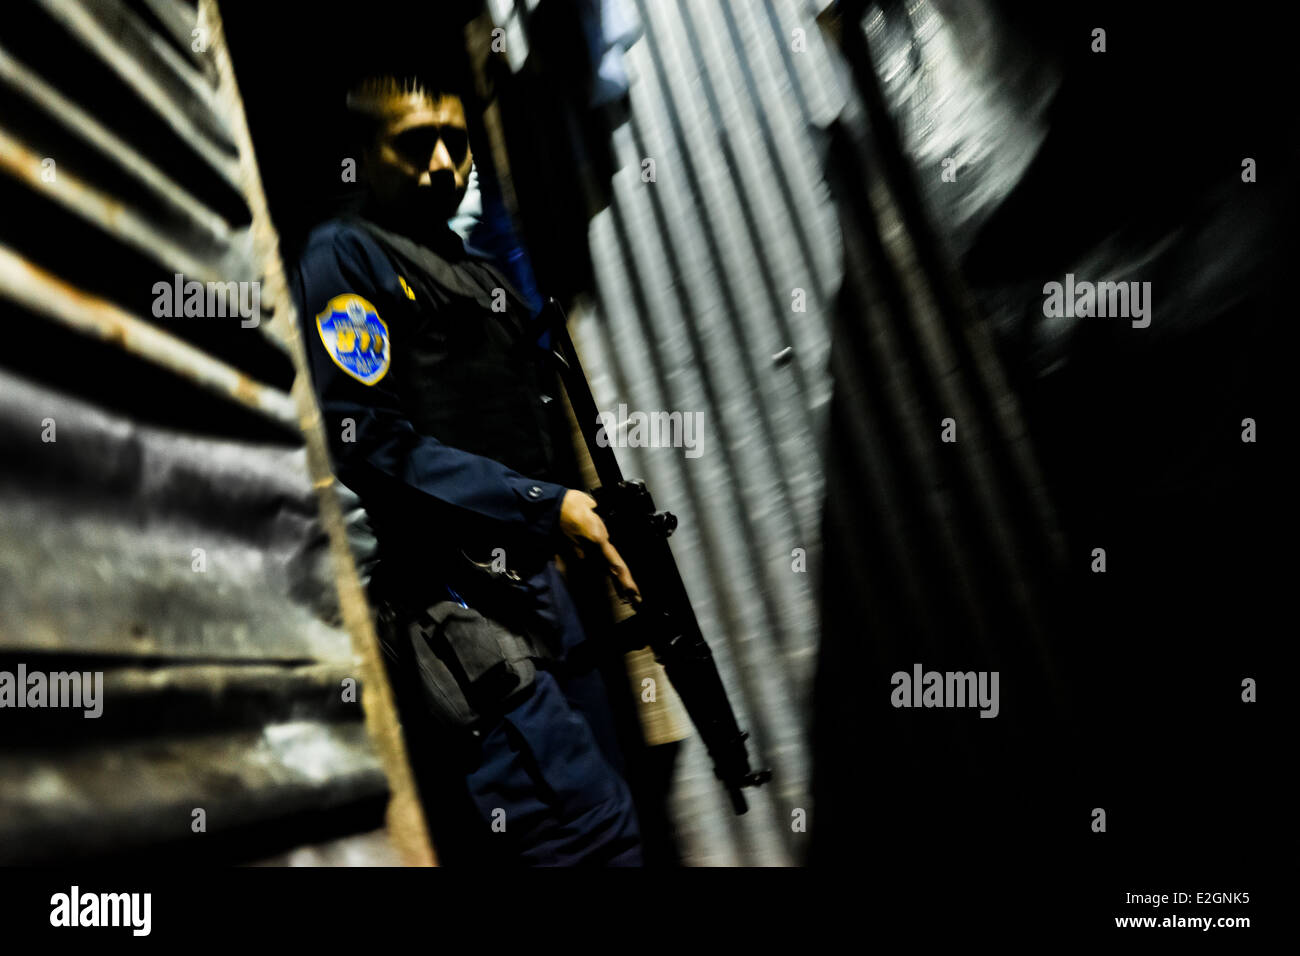 A policeman from the special emergency unit chases supposed gang members during the night in San Salvador, El Salvador. Stock Photo